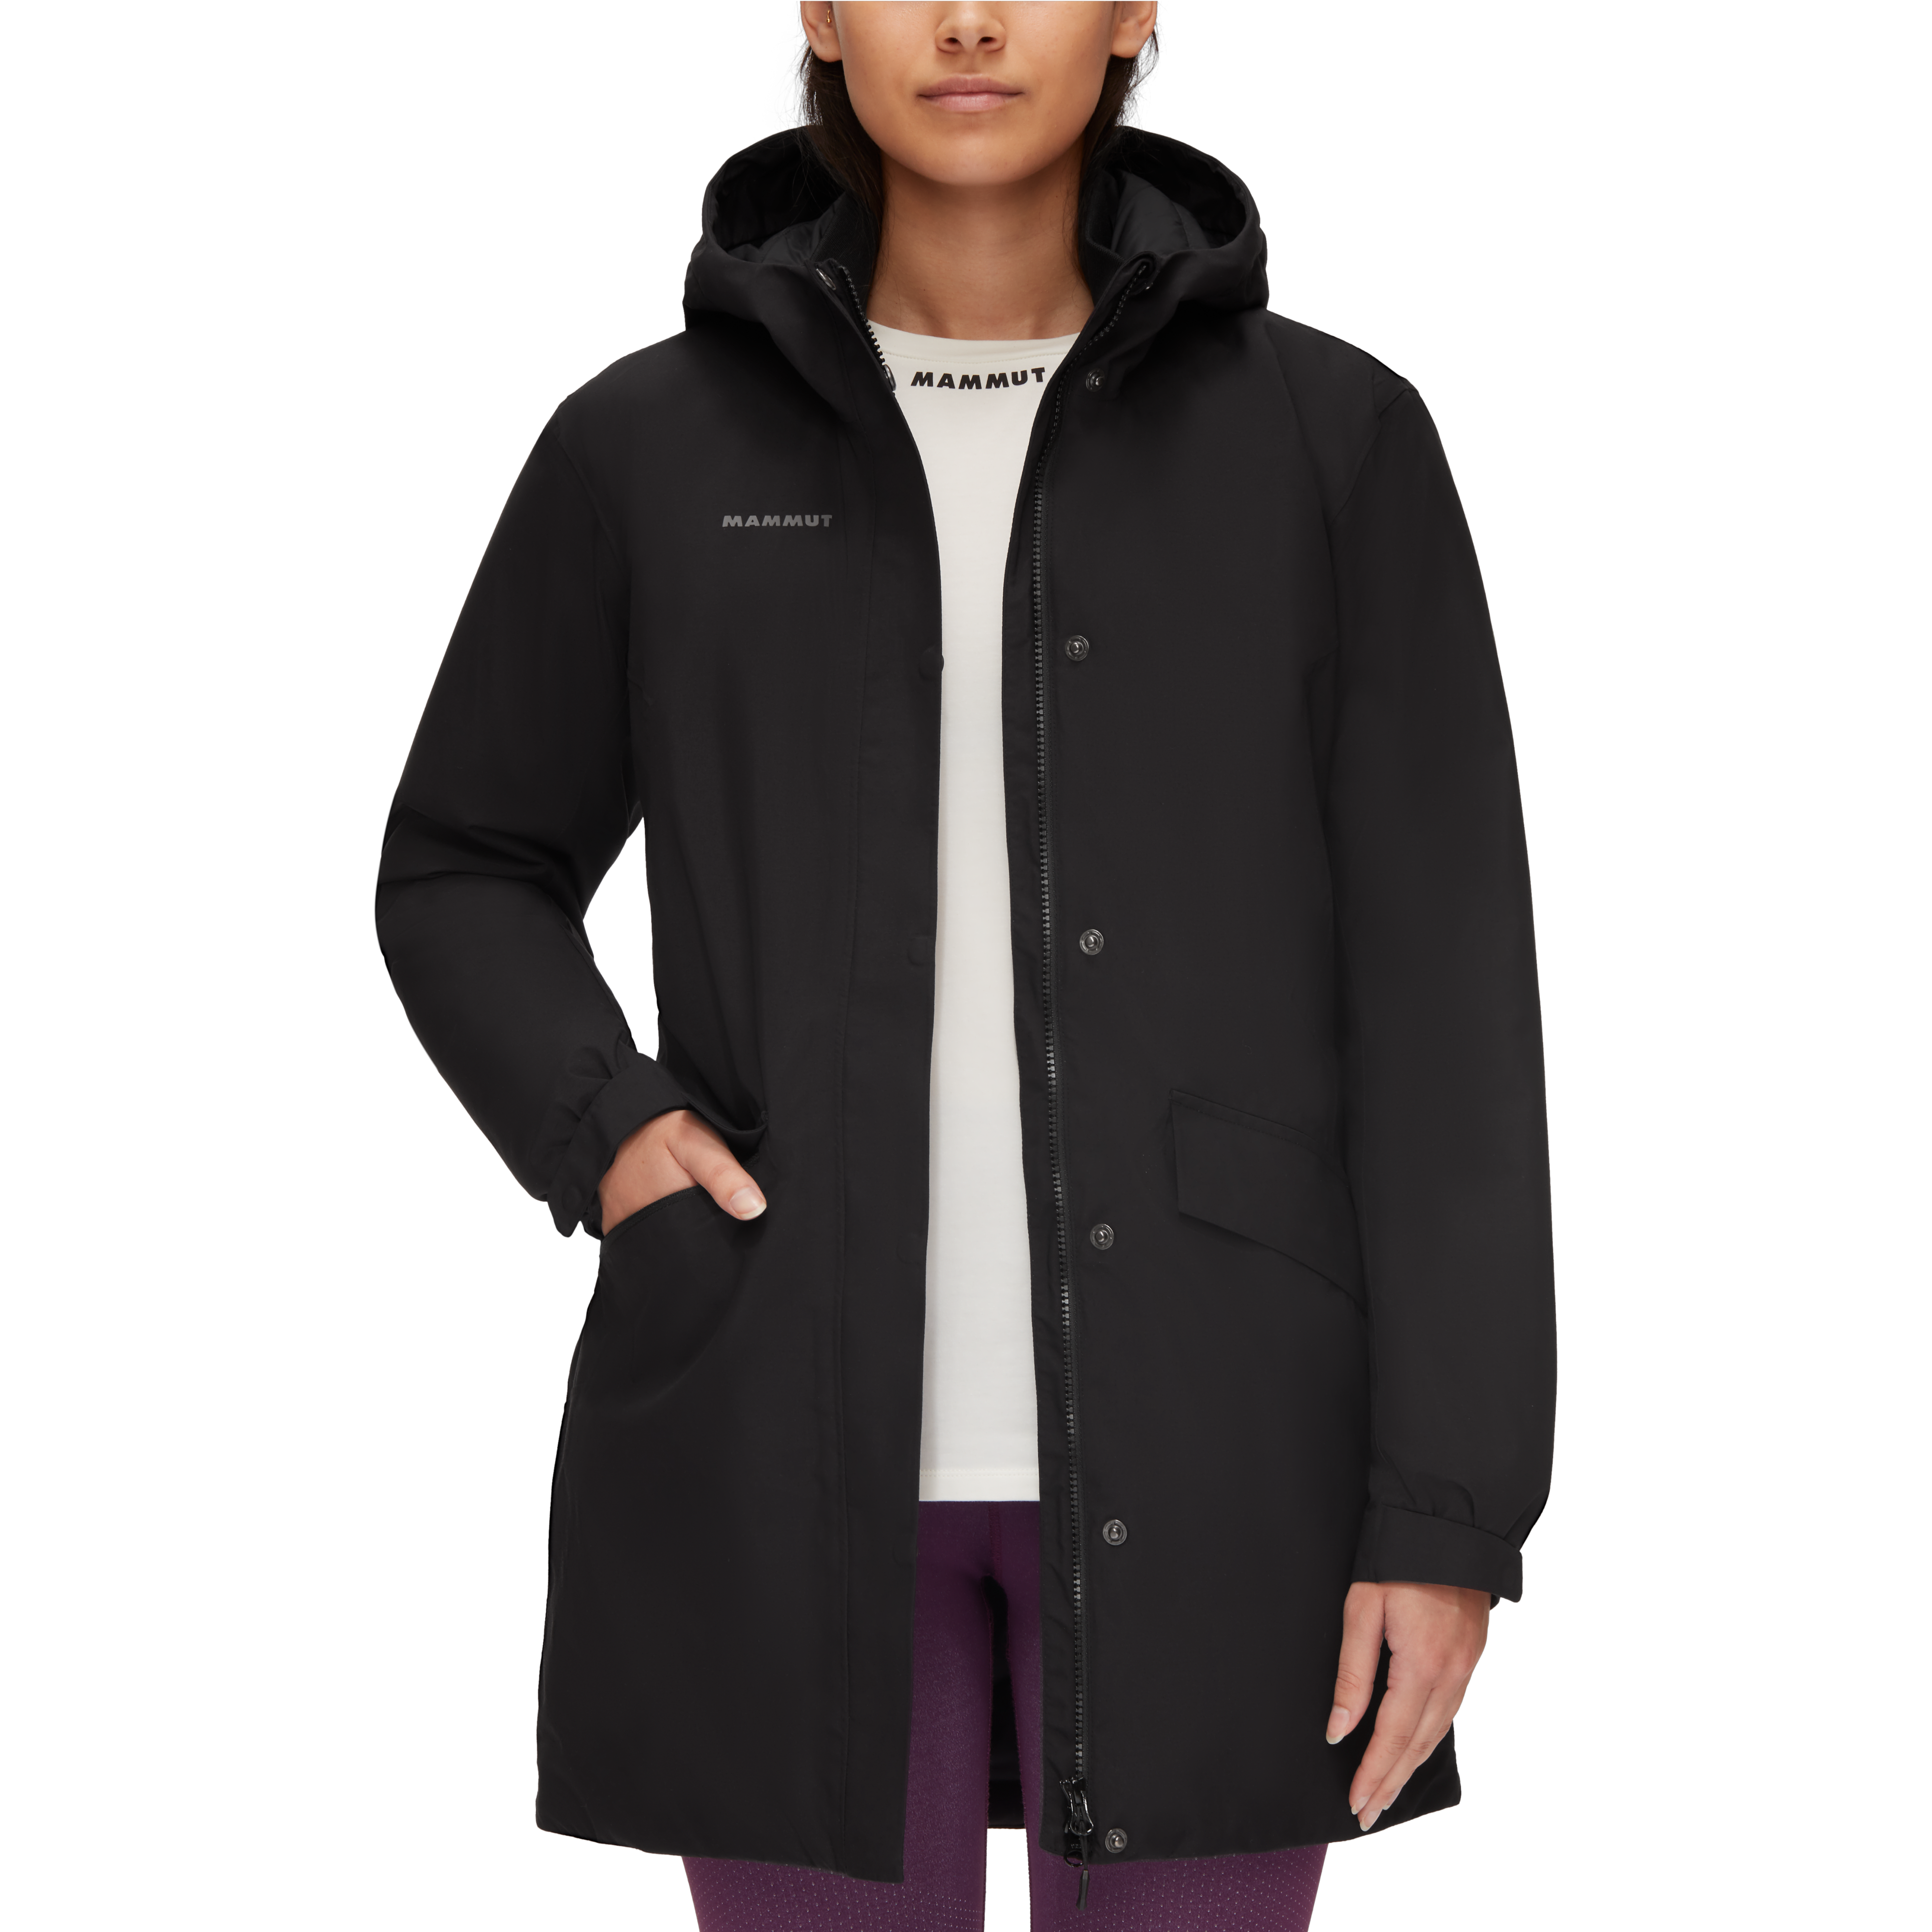 Chamuera HS Thermo Hooded Parka Women thumbnail